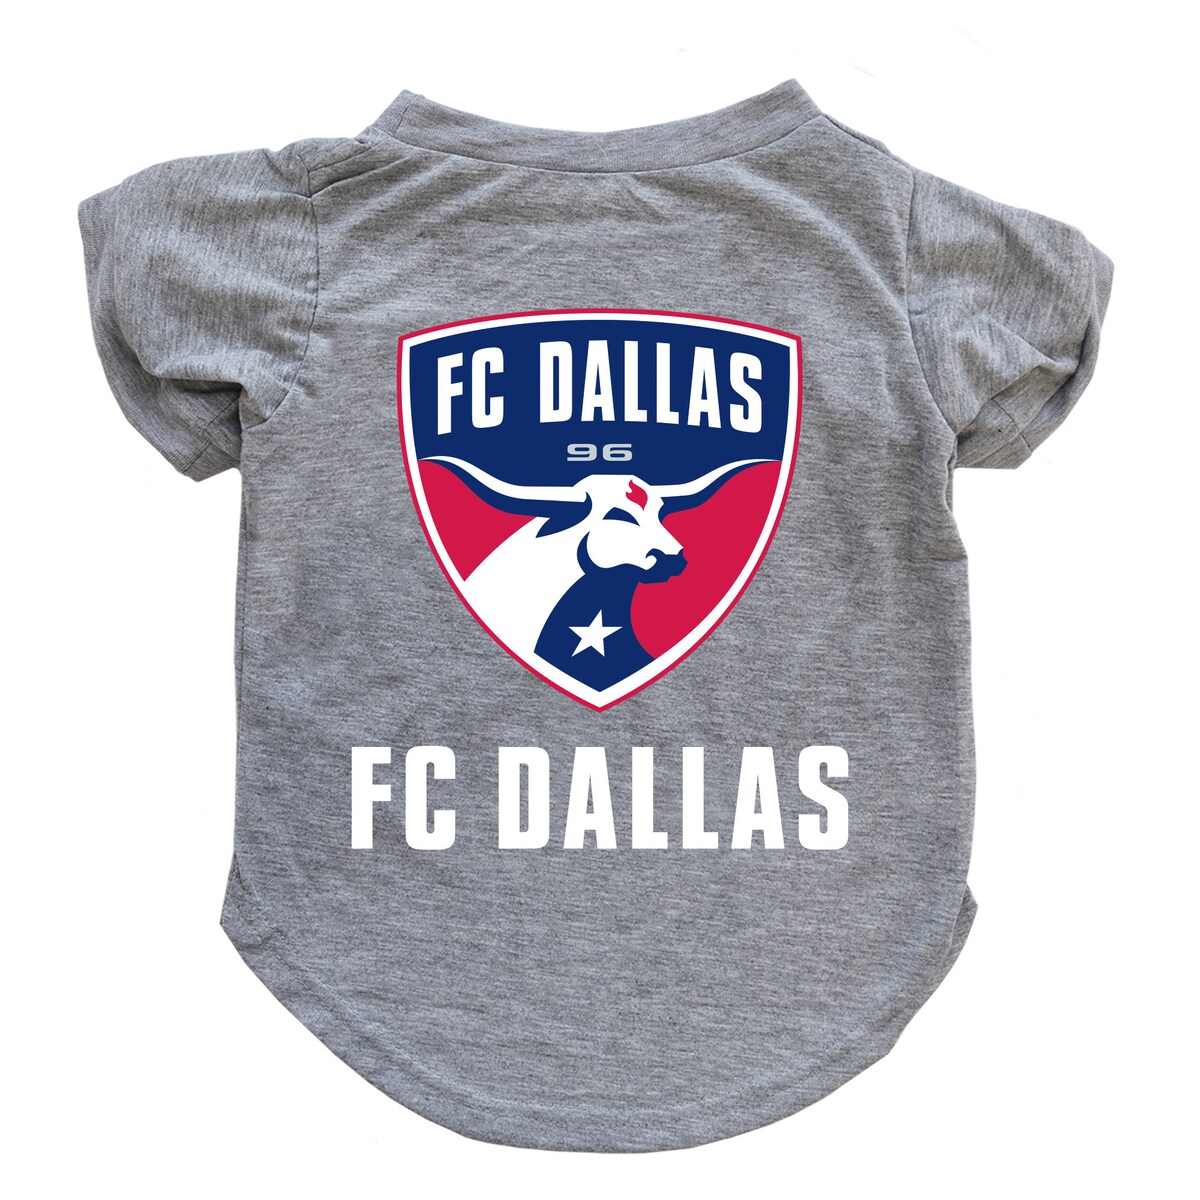 Help your best friend showcase their FURocity on FC Dallas game days with this Little Earth Pet T-shirt. It features striking FC Dallas graphics that let everyone know who they woof for on the pitch.Size S fits 12-20lbs.Machine wash, tumble dry lowScreen print graphicsSize XL fits 40-60lbs.Officially licensedSize 2XL fits 58-80lbs.Short sleeveSize M fits 18-30lbs.ImportedBrand: Little EarthSize L fits 28-42lbs.Crew neck